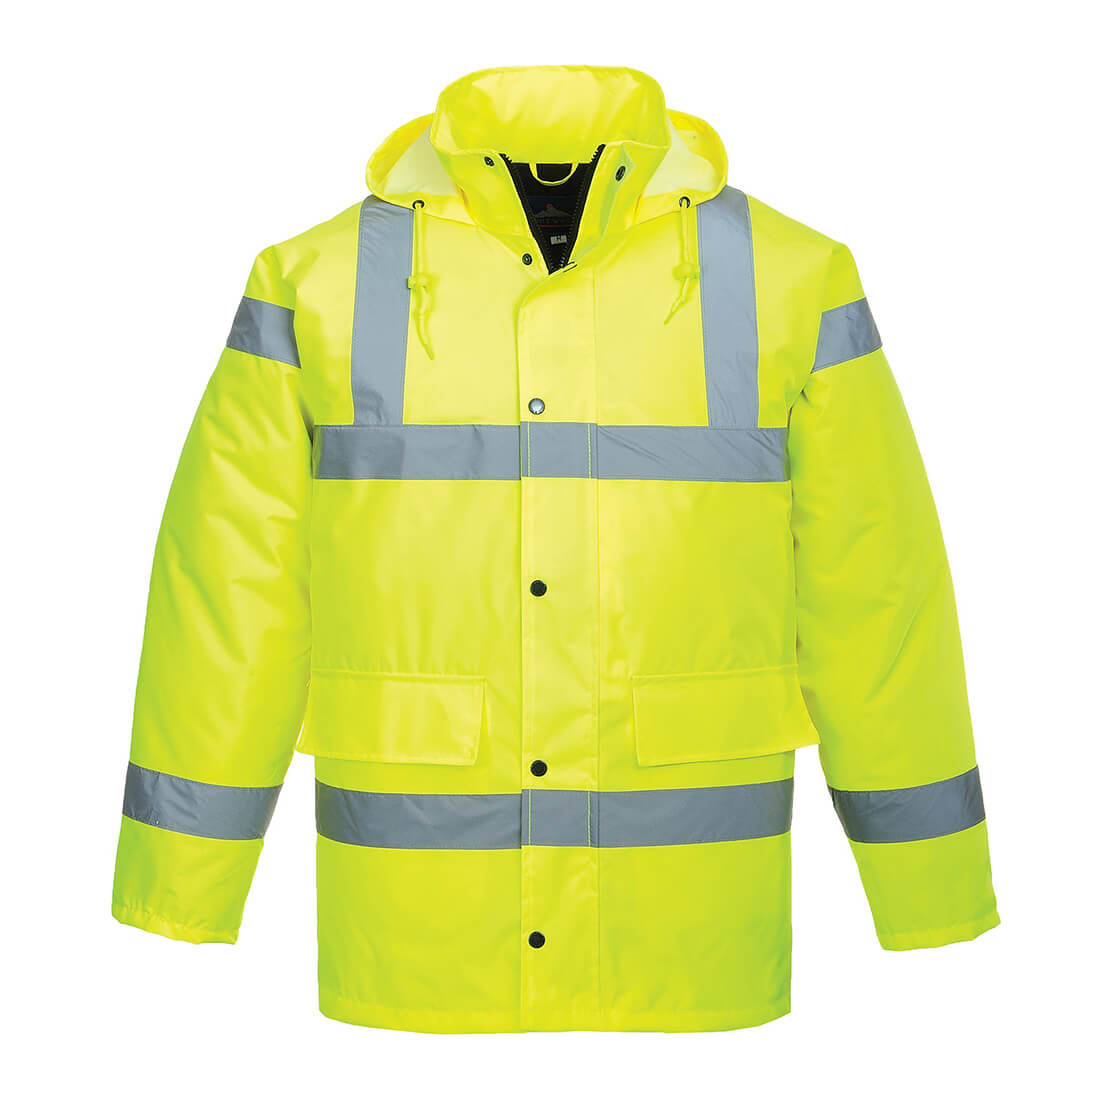 Image of Oxford Weave 300D Class 3 Hi Vis Traffic Jacket Yellow S